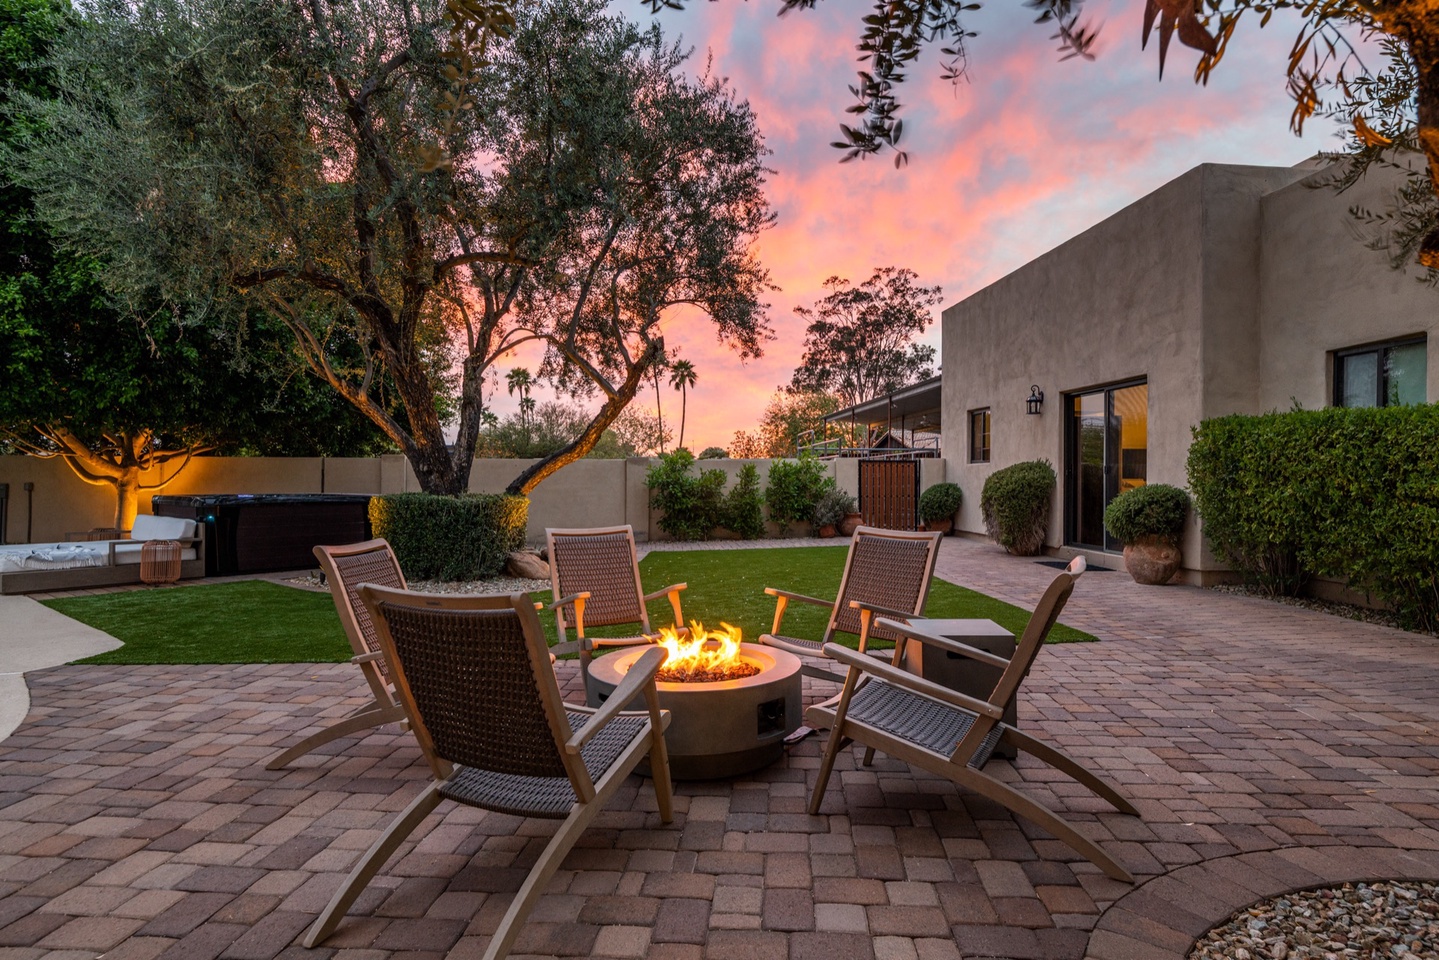 Gas lined fire-pit